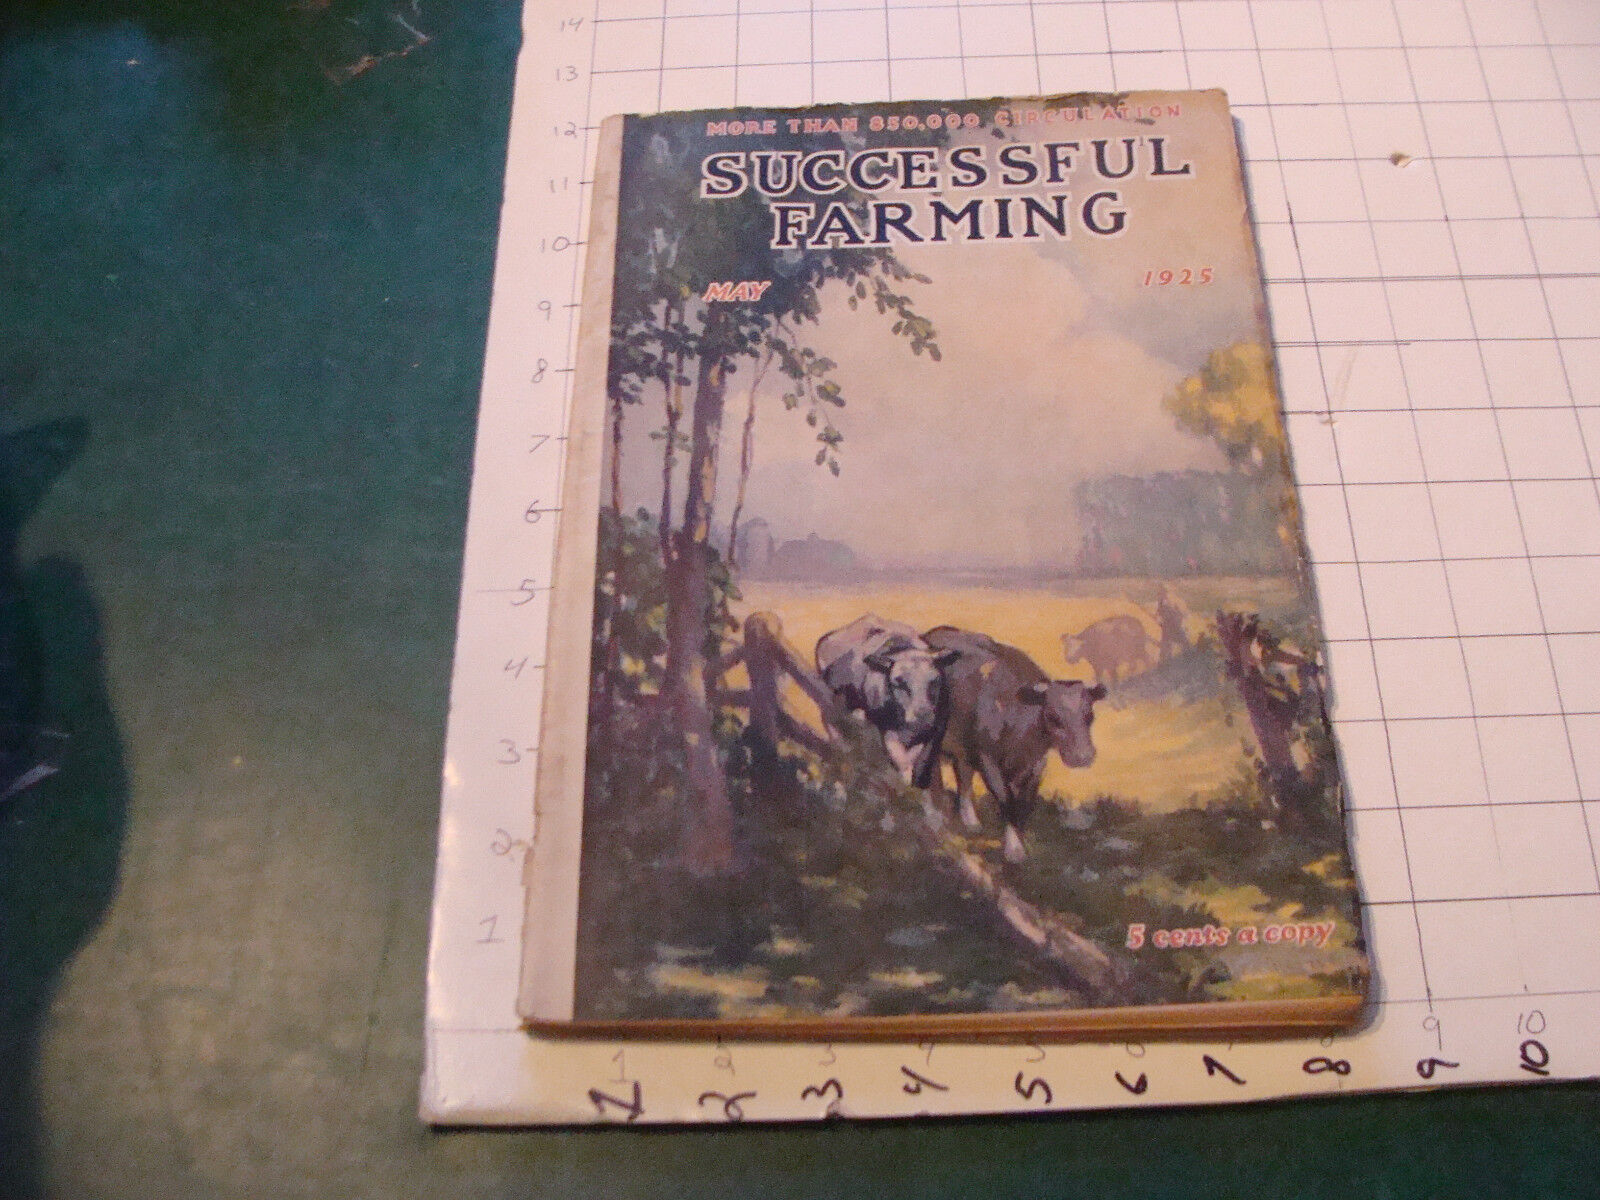 Check it out: SUCCESSFUL FARMING mag 1925 may COWS Cover